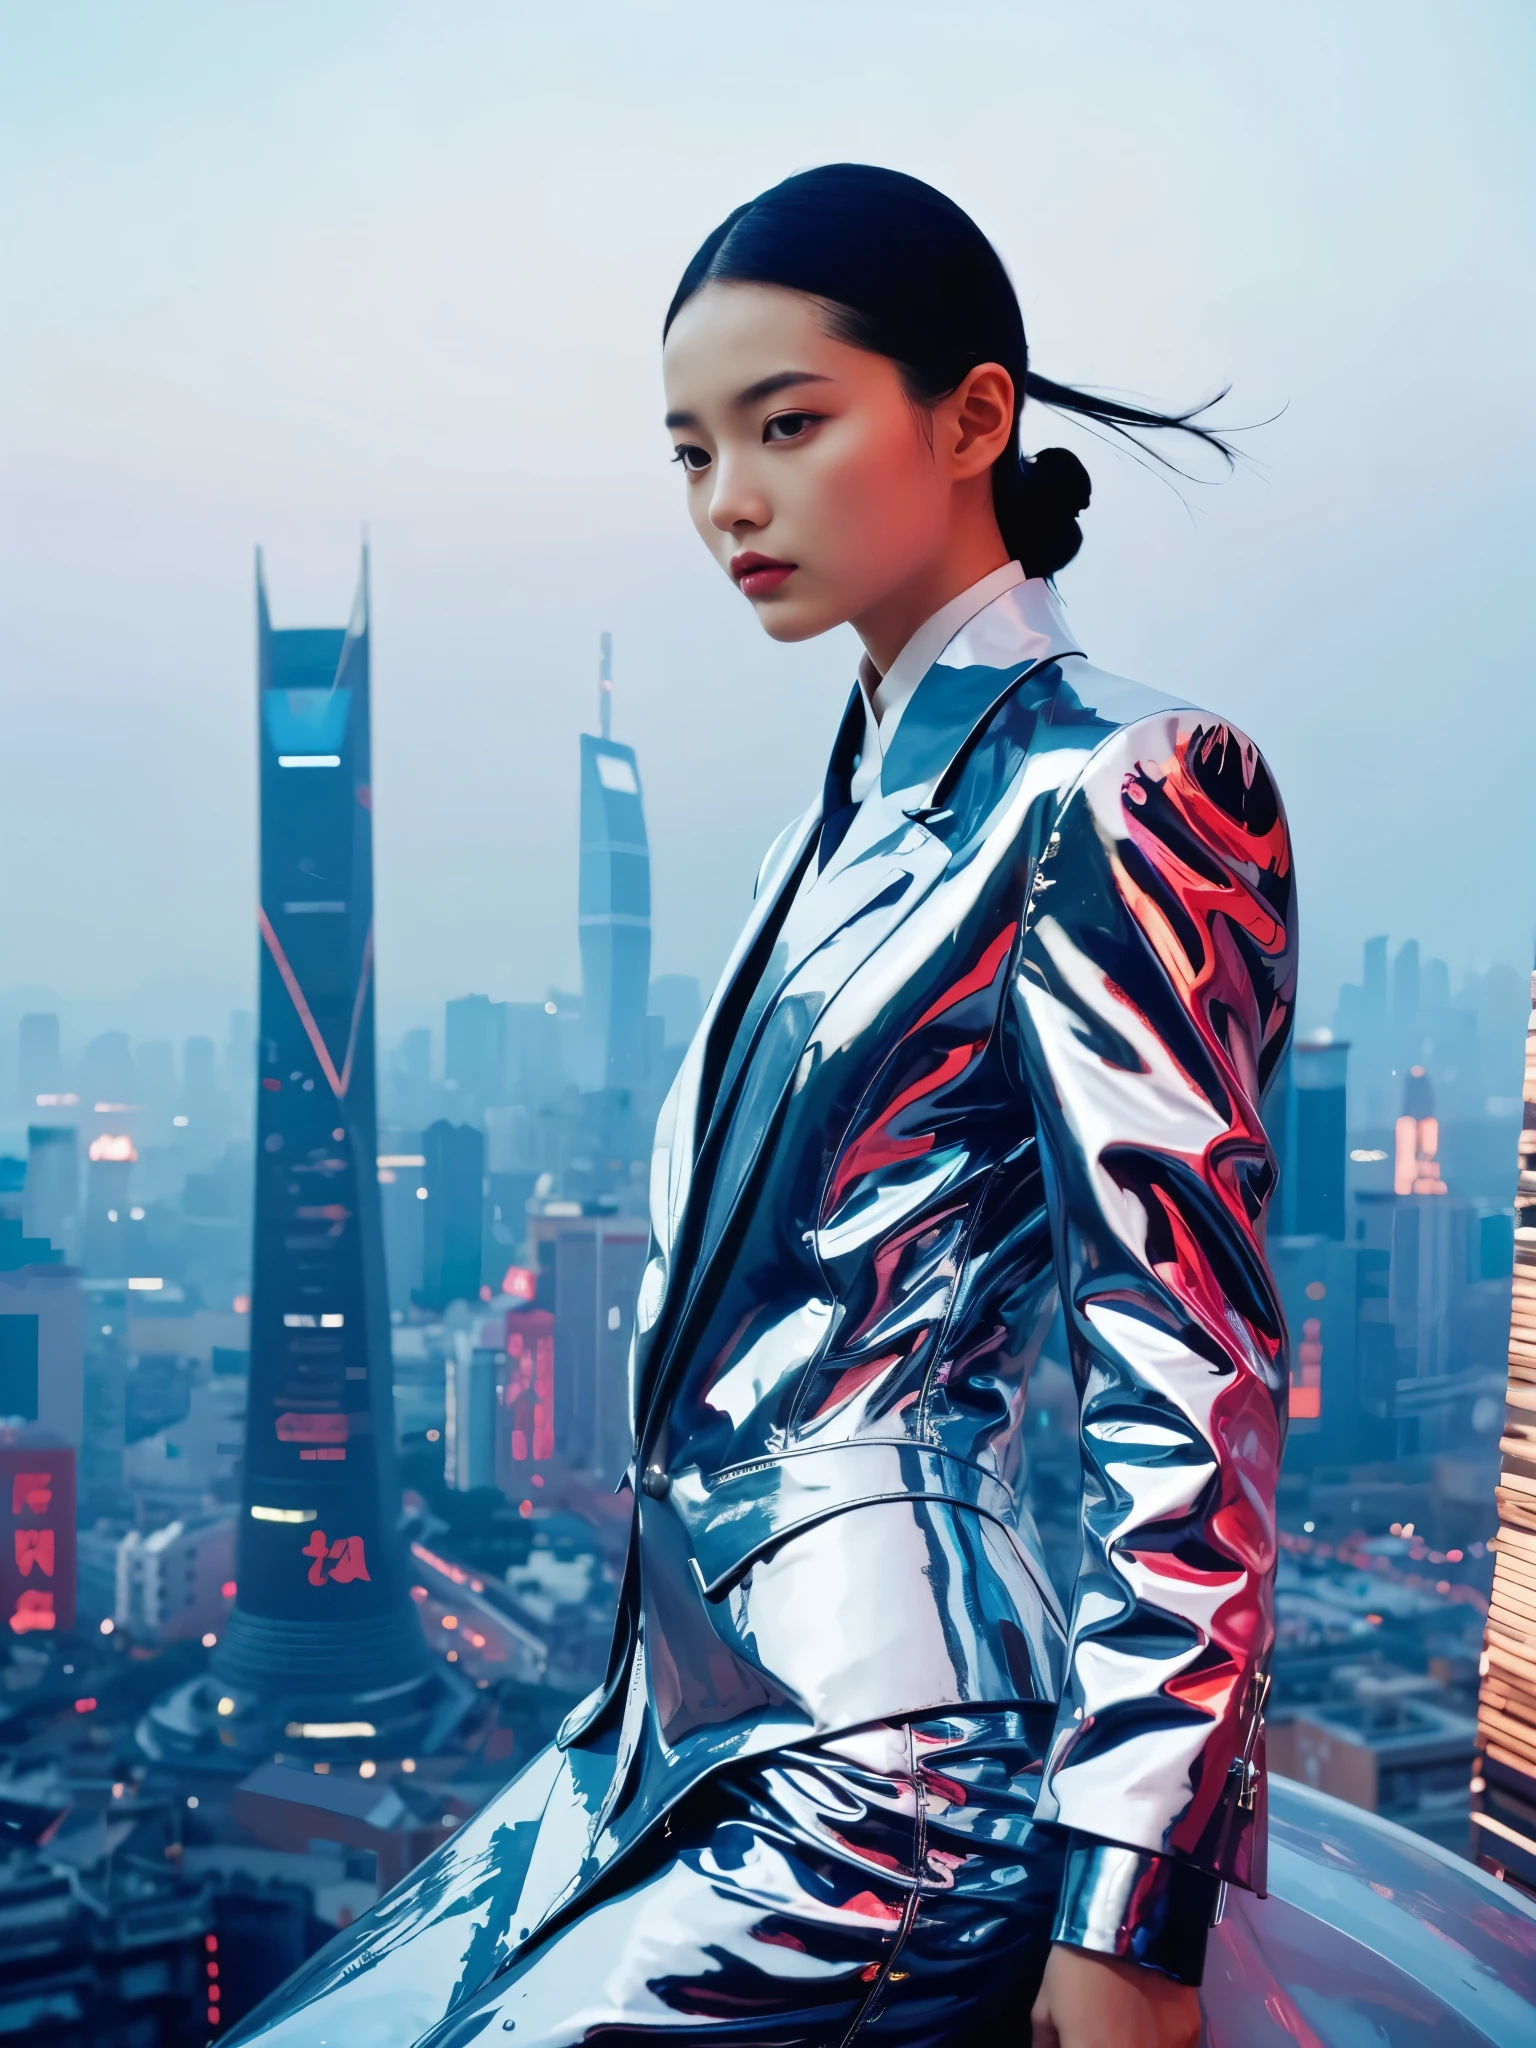 Step into a dreamscape where a high fashion model dons an avant-garde version of the Zhongshan suit by Yohji Yamamoto. This low angle view for V Magazine taken in a futuristic Shanghai skyline, demonstrates the visionary aesthetic of Pierre et Gilles